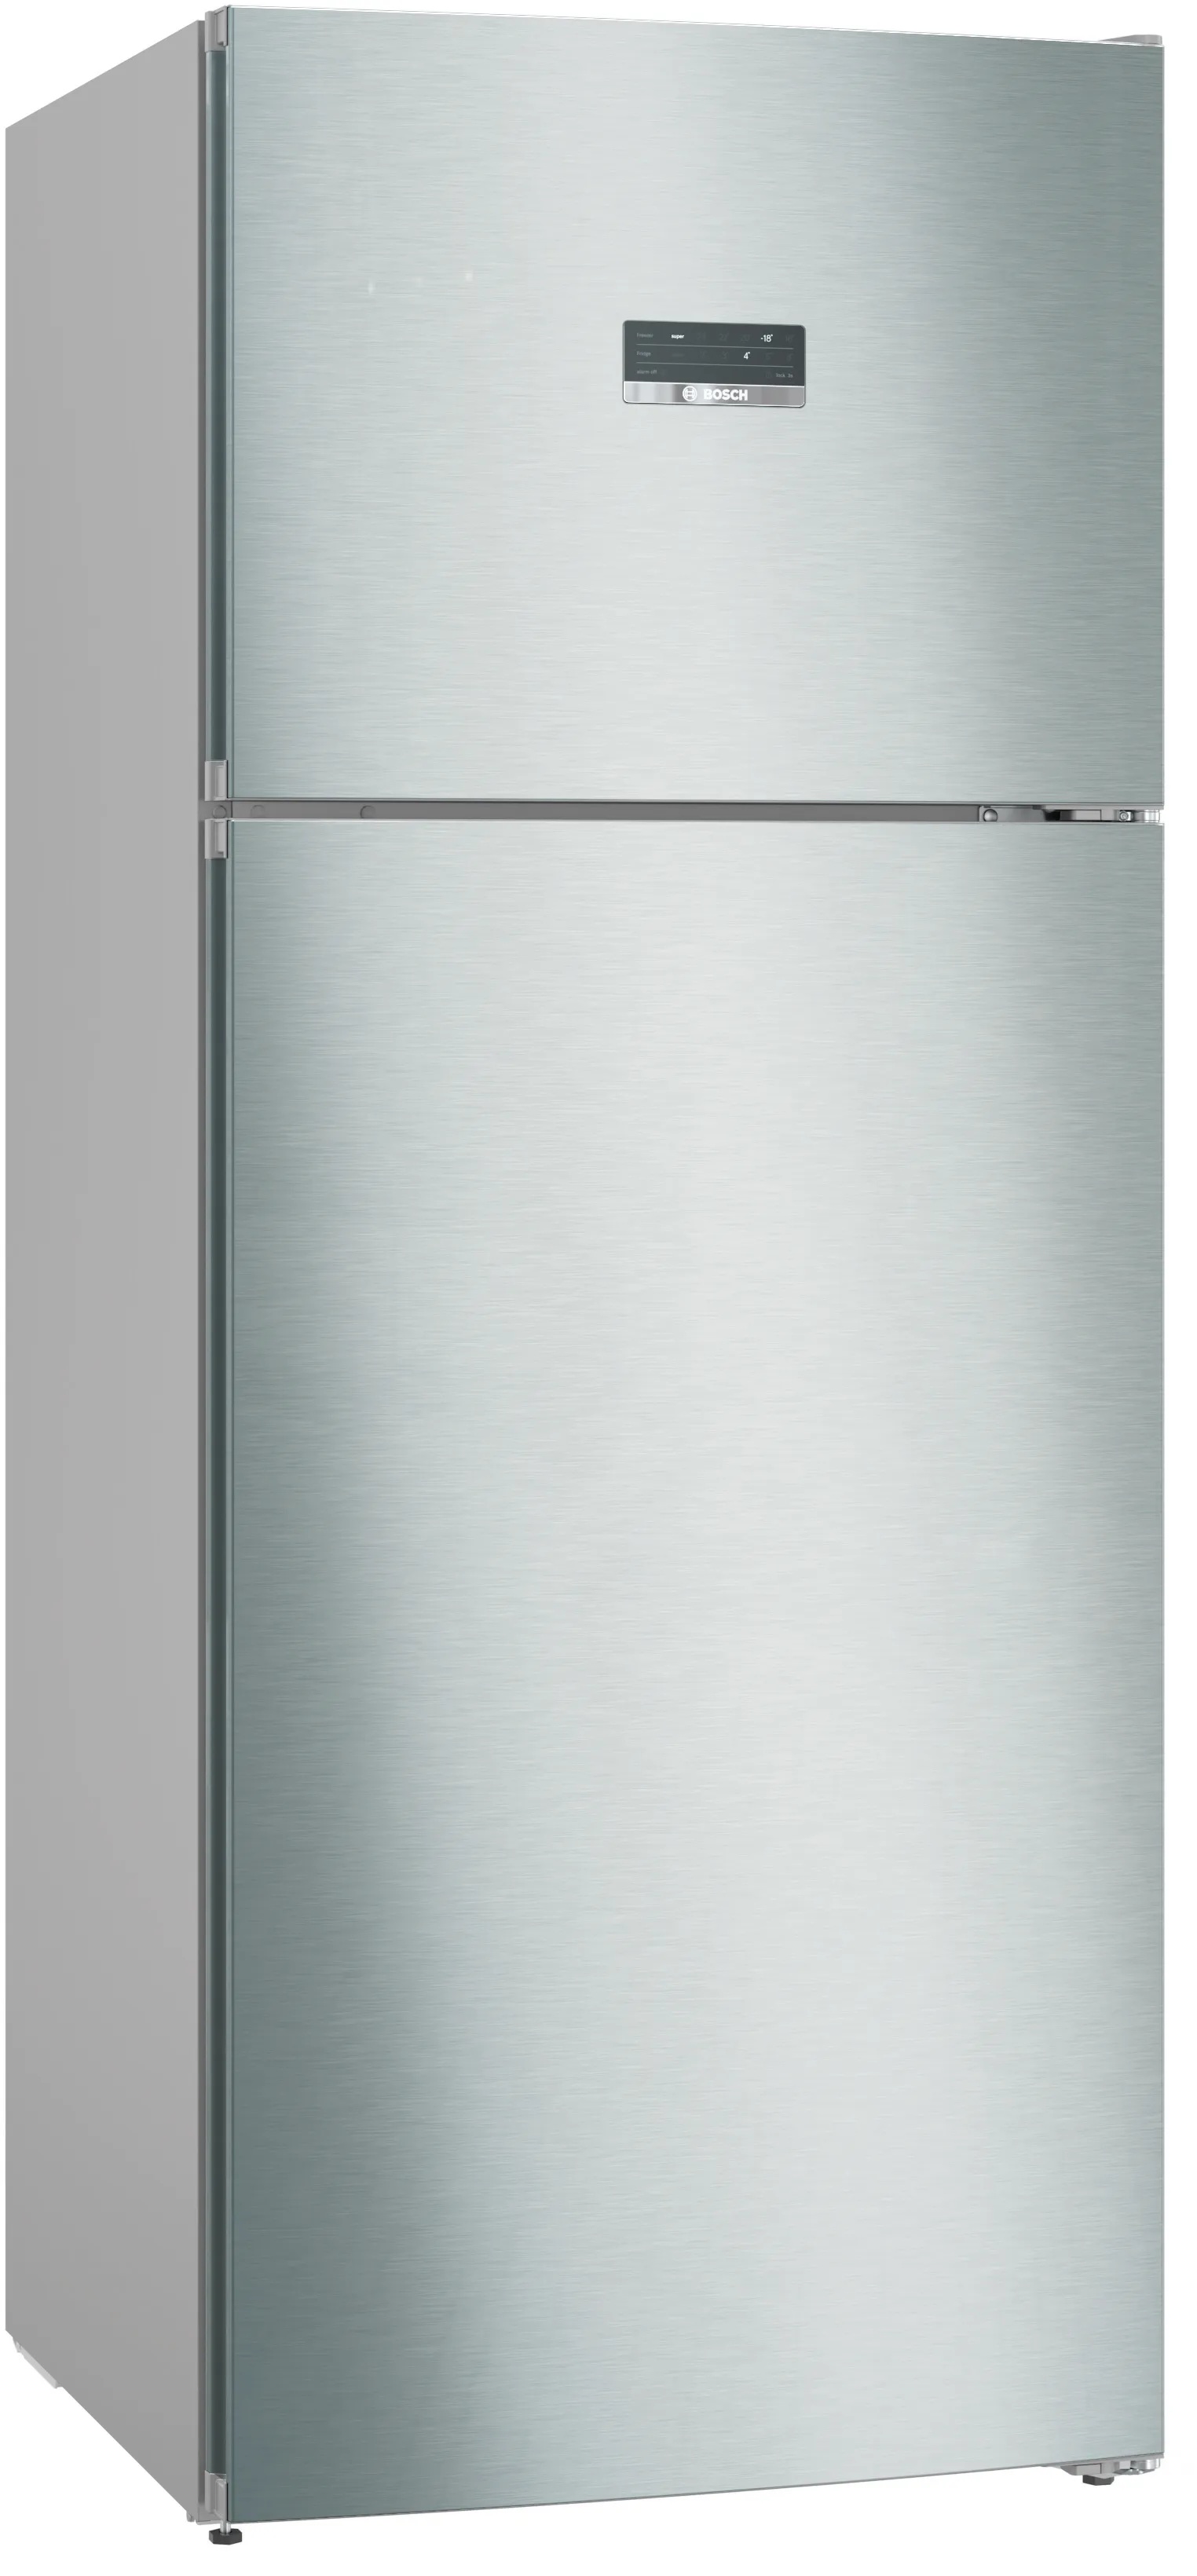 Series 4 free-standing fridge-freezer with freezer at top 186 x 75 cm Stainless steel (with anti-fingerprint) 